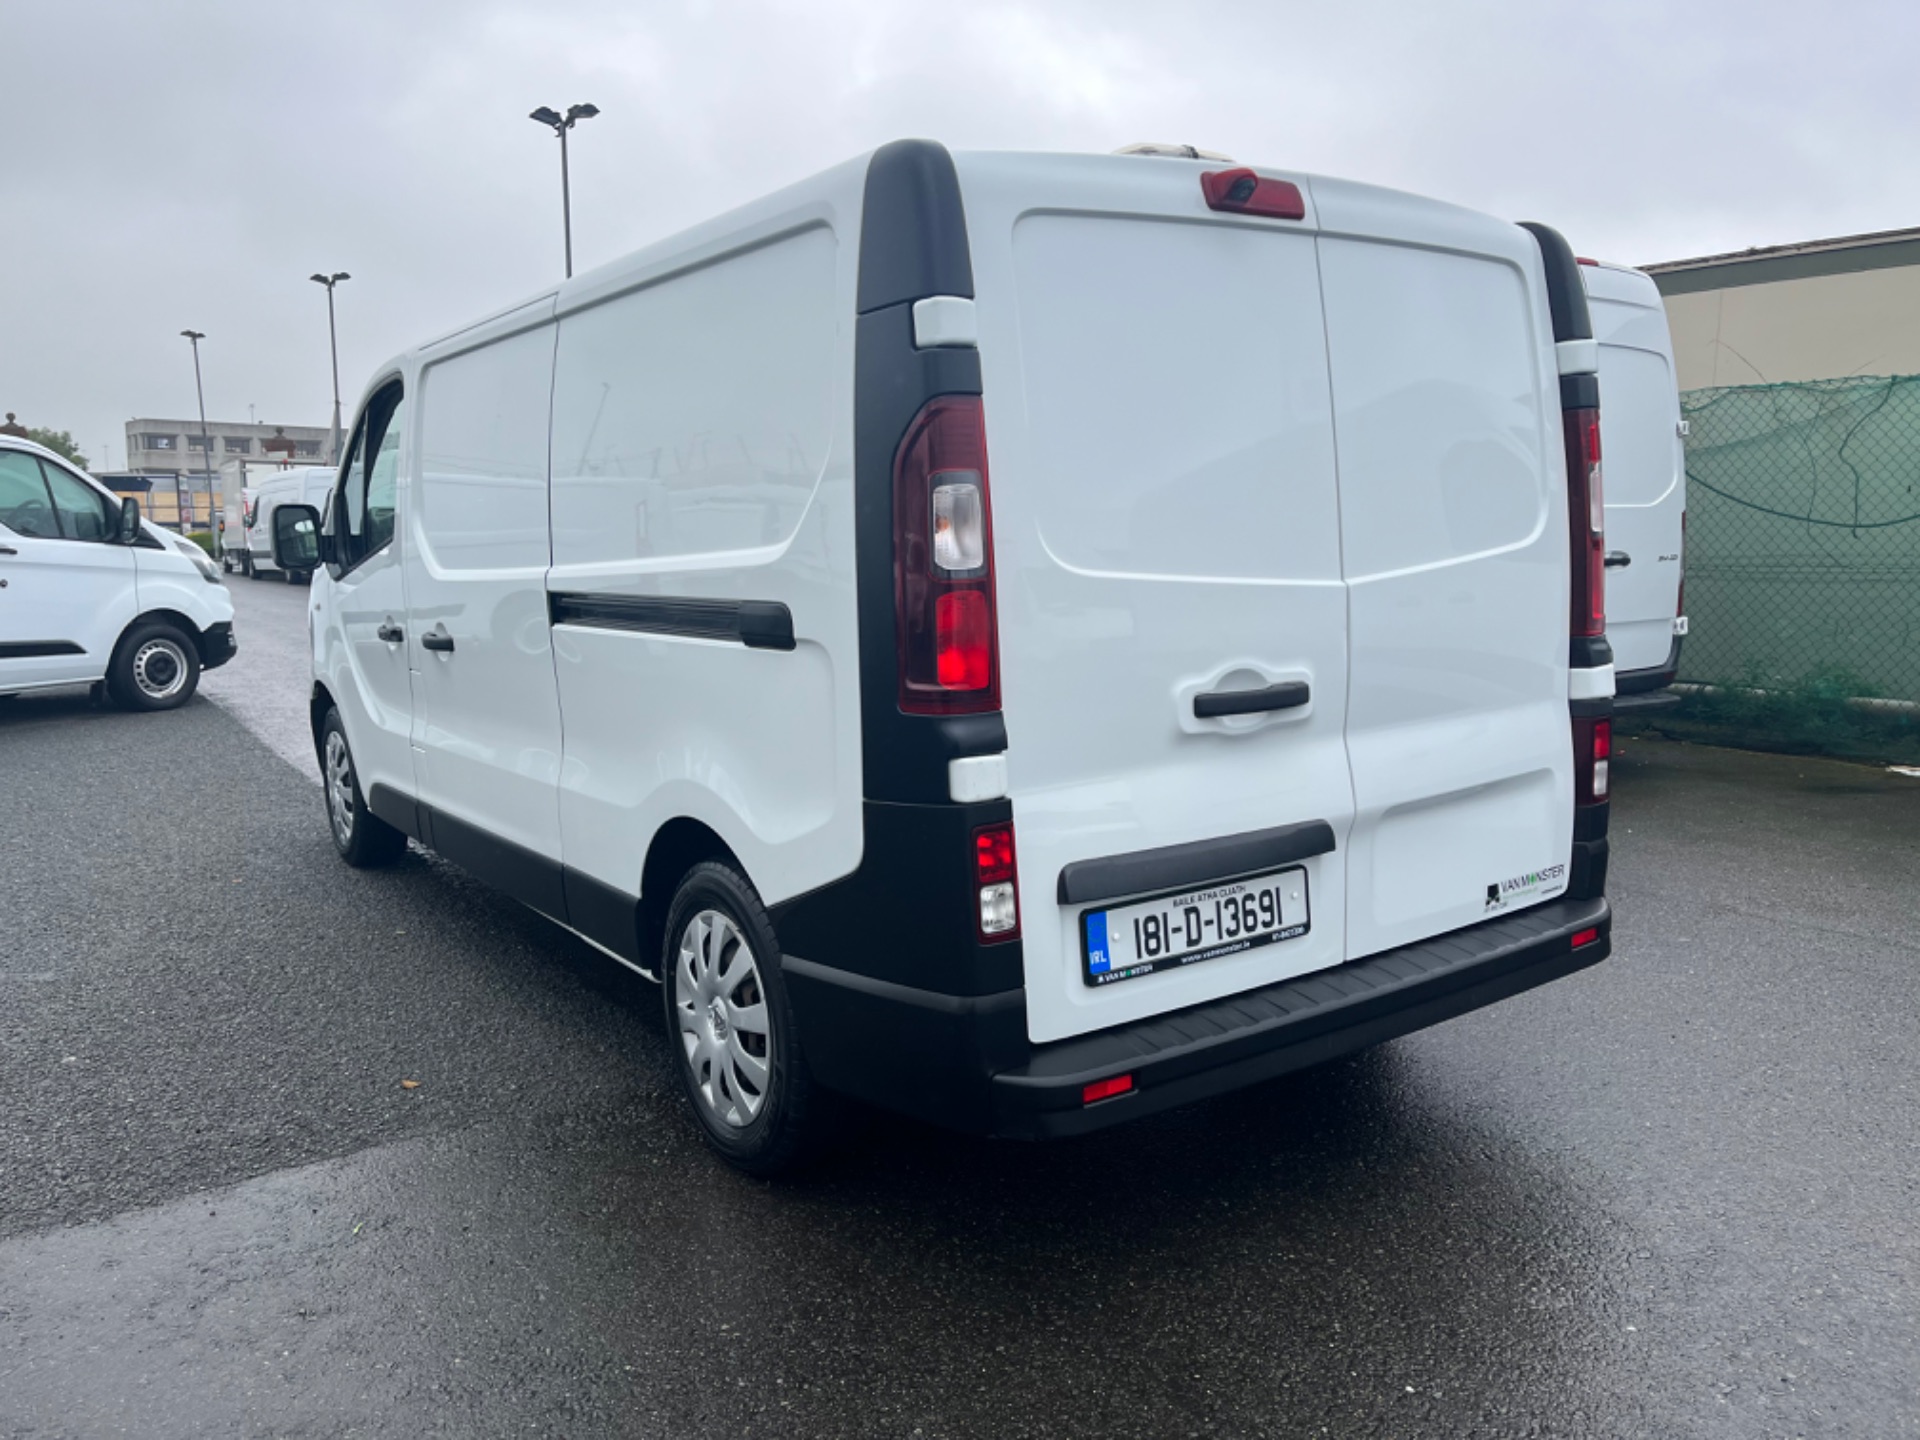 2018 Renault Trafic LL29 DCI 120 Business 3DR (181D13691) Image 4